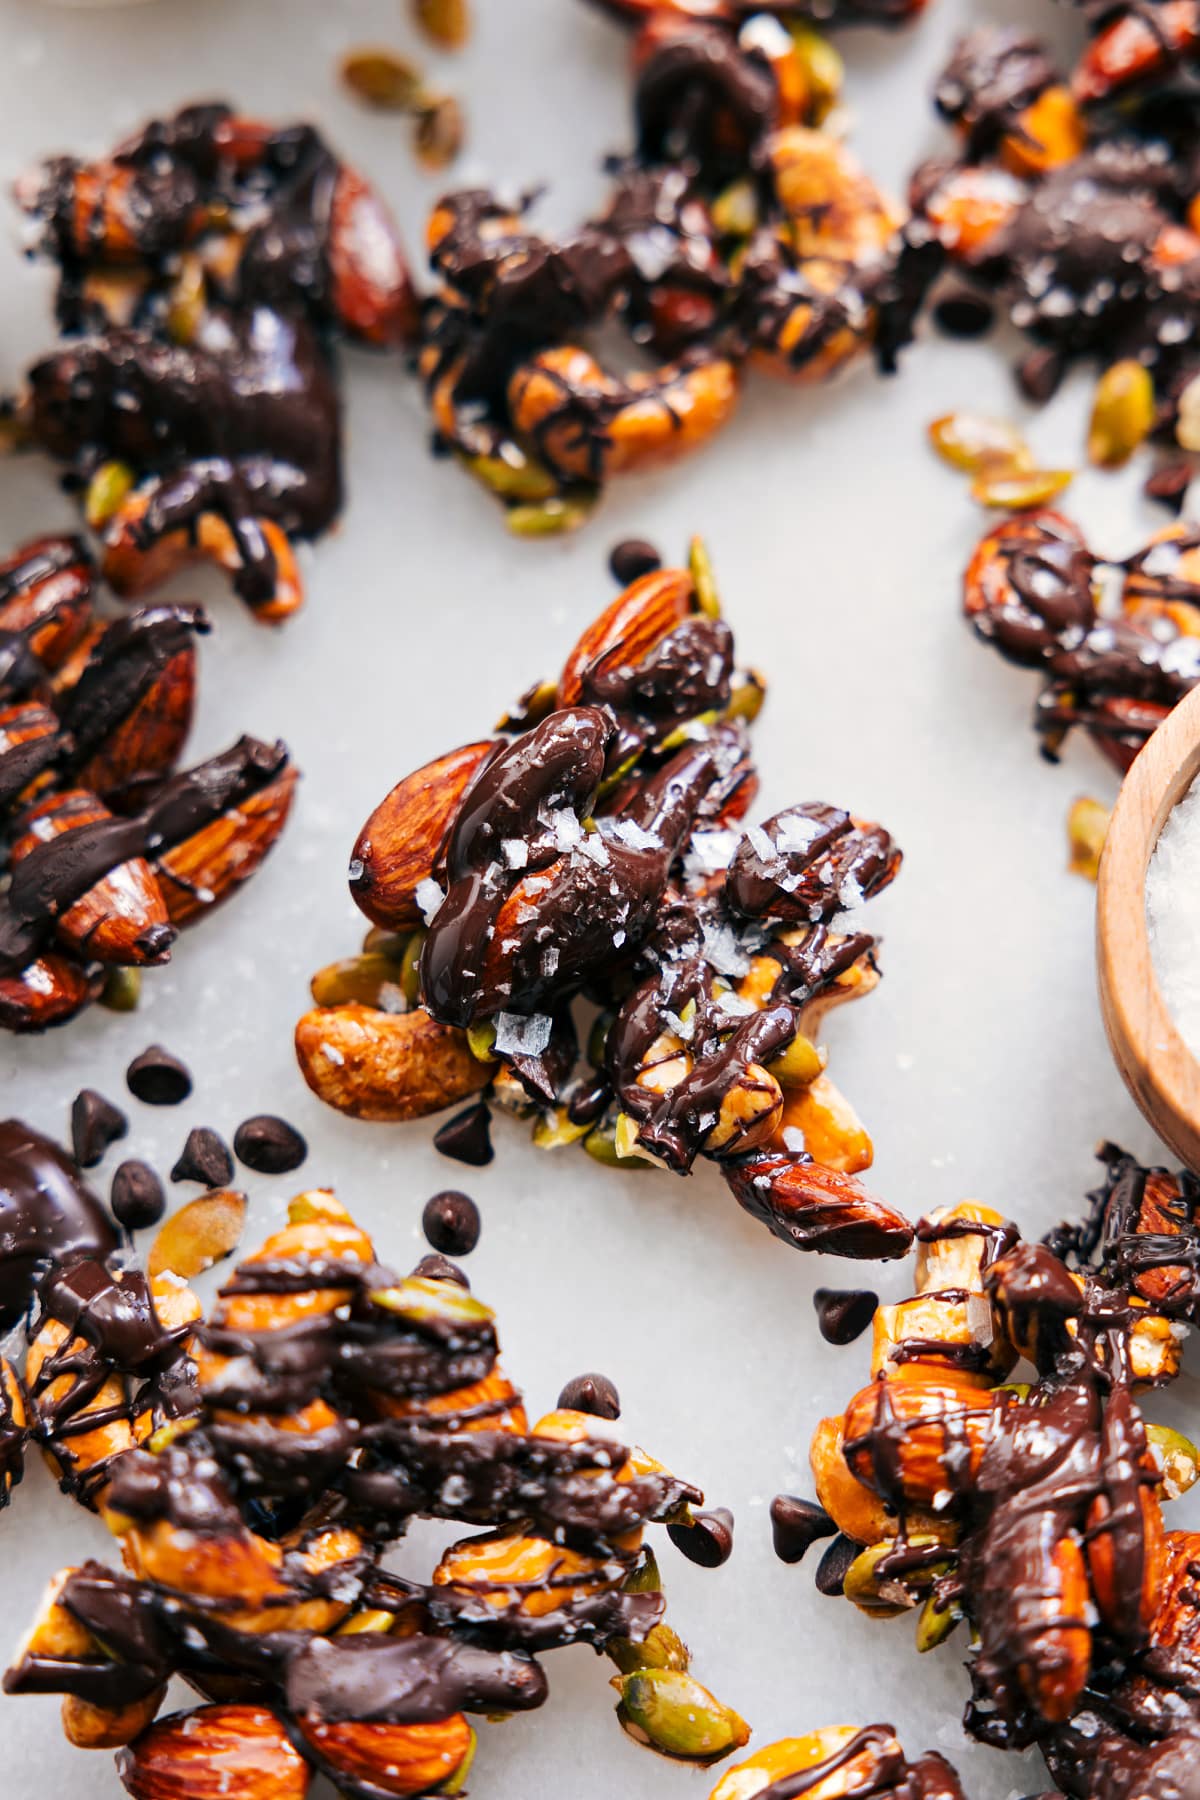 The healthy nut bark broken up in little pieces for a quick and delicious snack.